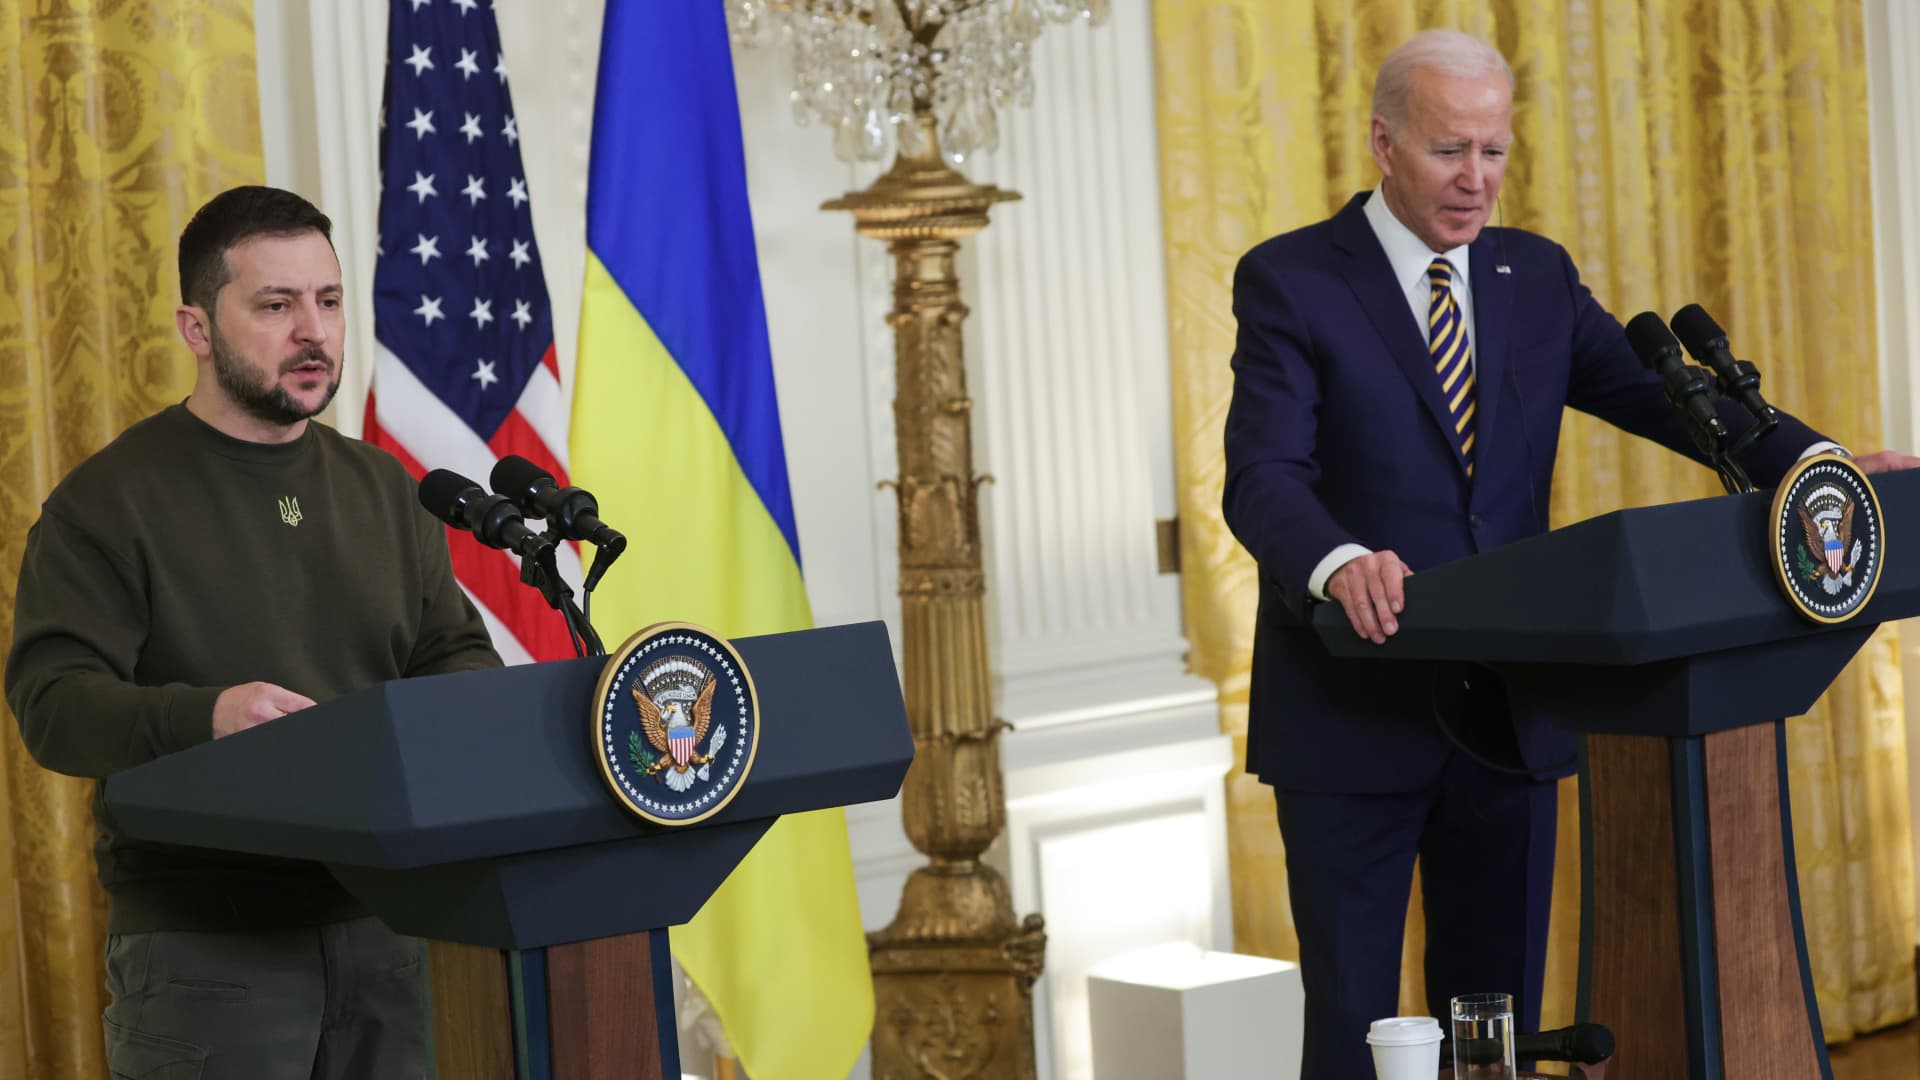 U.S. President Joe Biden (R) and President of Ukraine Volodymyr Zelensky hold a joint press conference in the East Room at the White House on December 21, 2022 in Washington, DC.